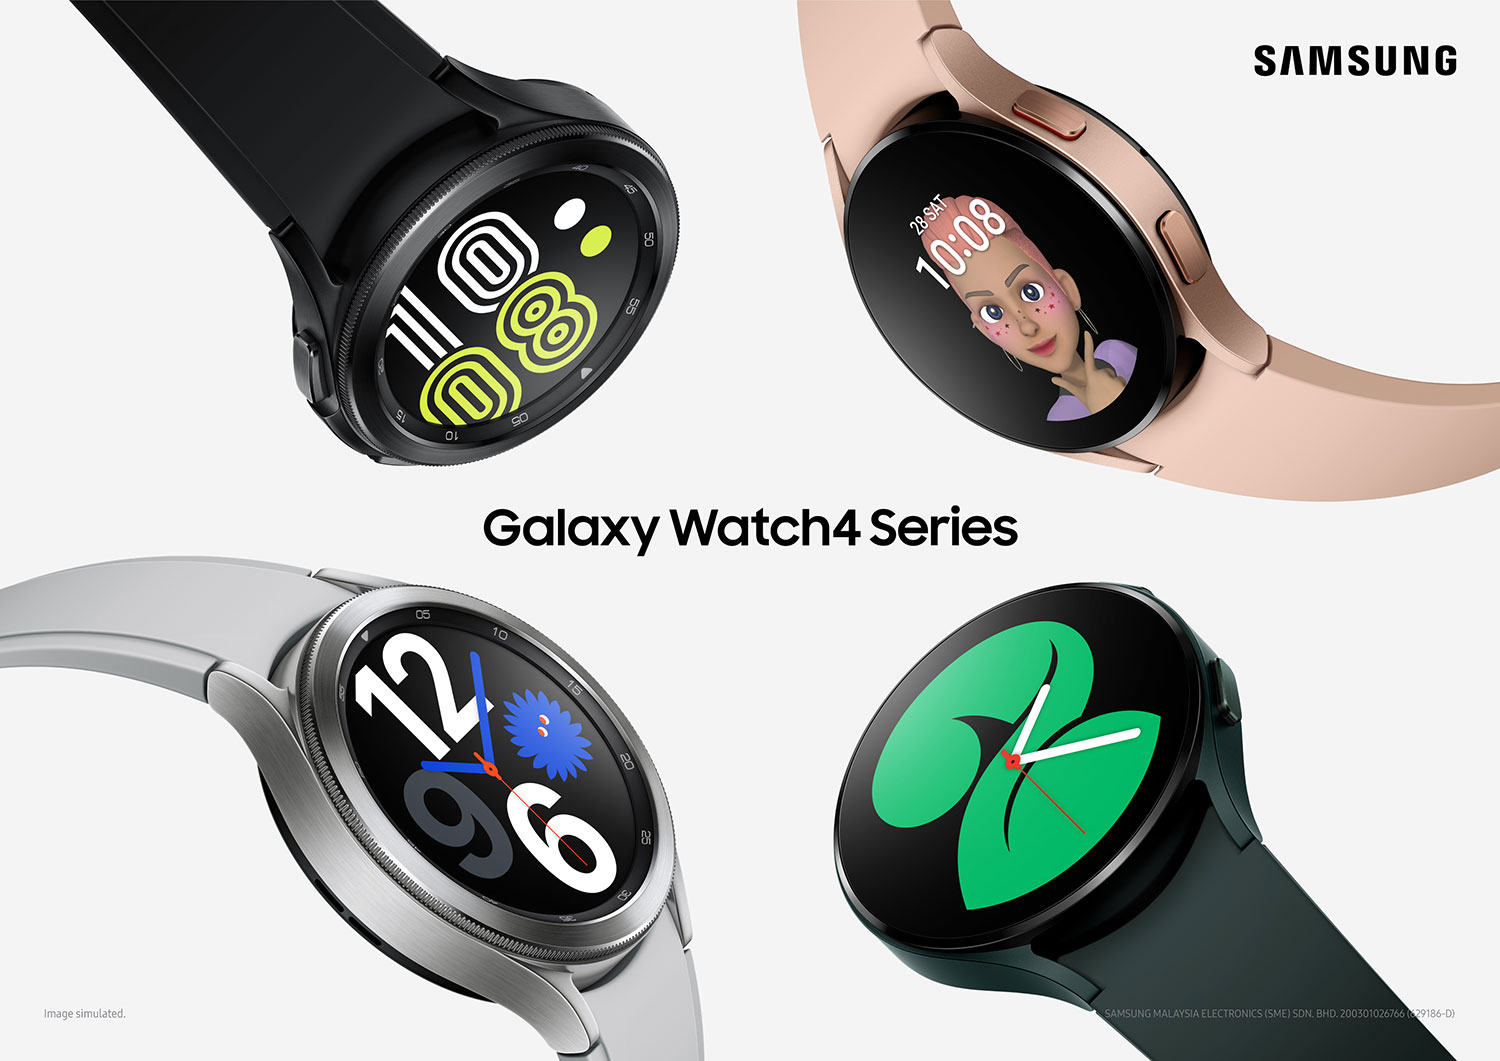 Samsung Galaxy Watch4 Series Goes Official